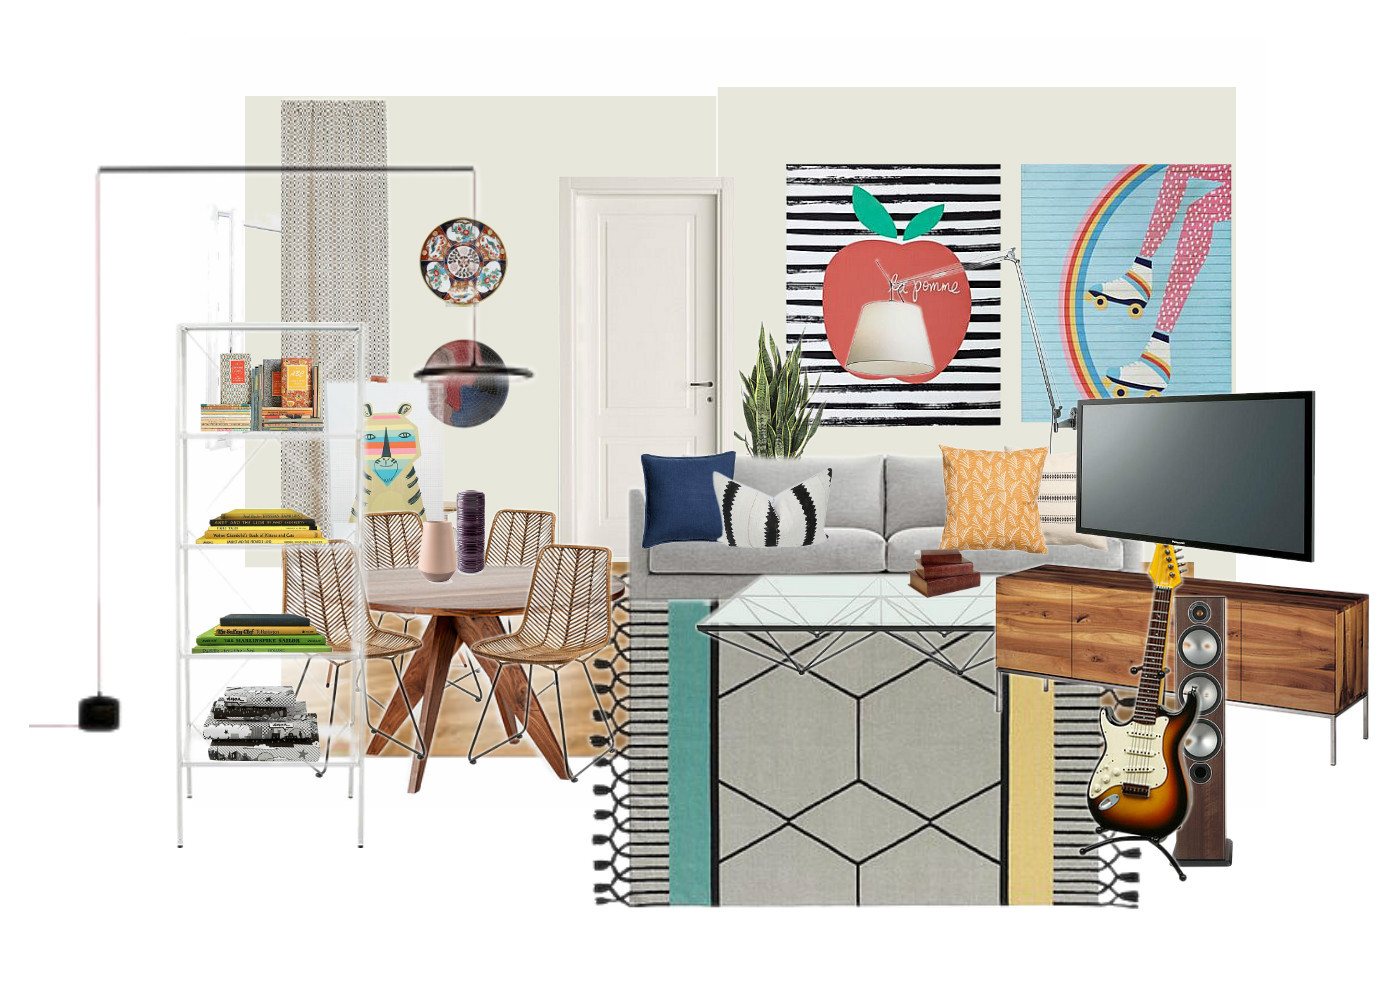 Interior design concept moodboard planning apartment fusion eclectic